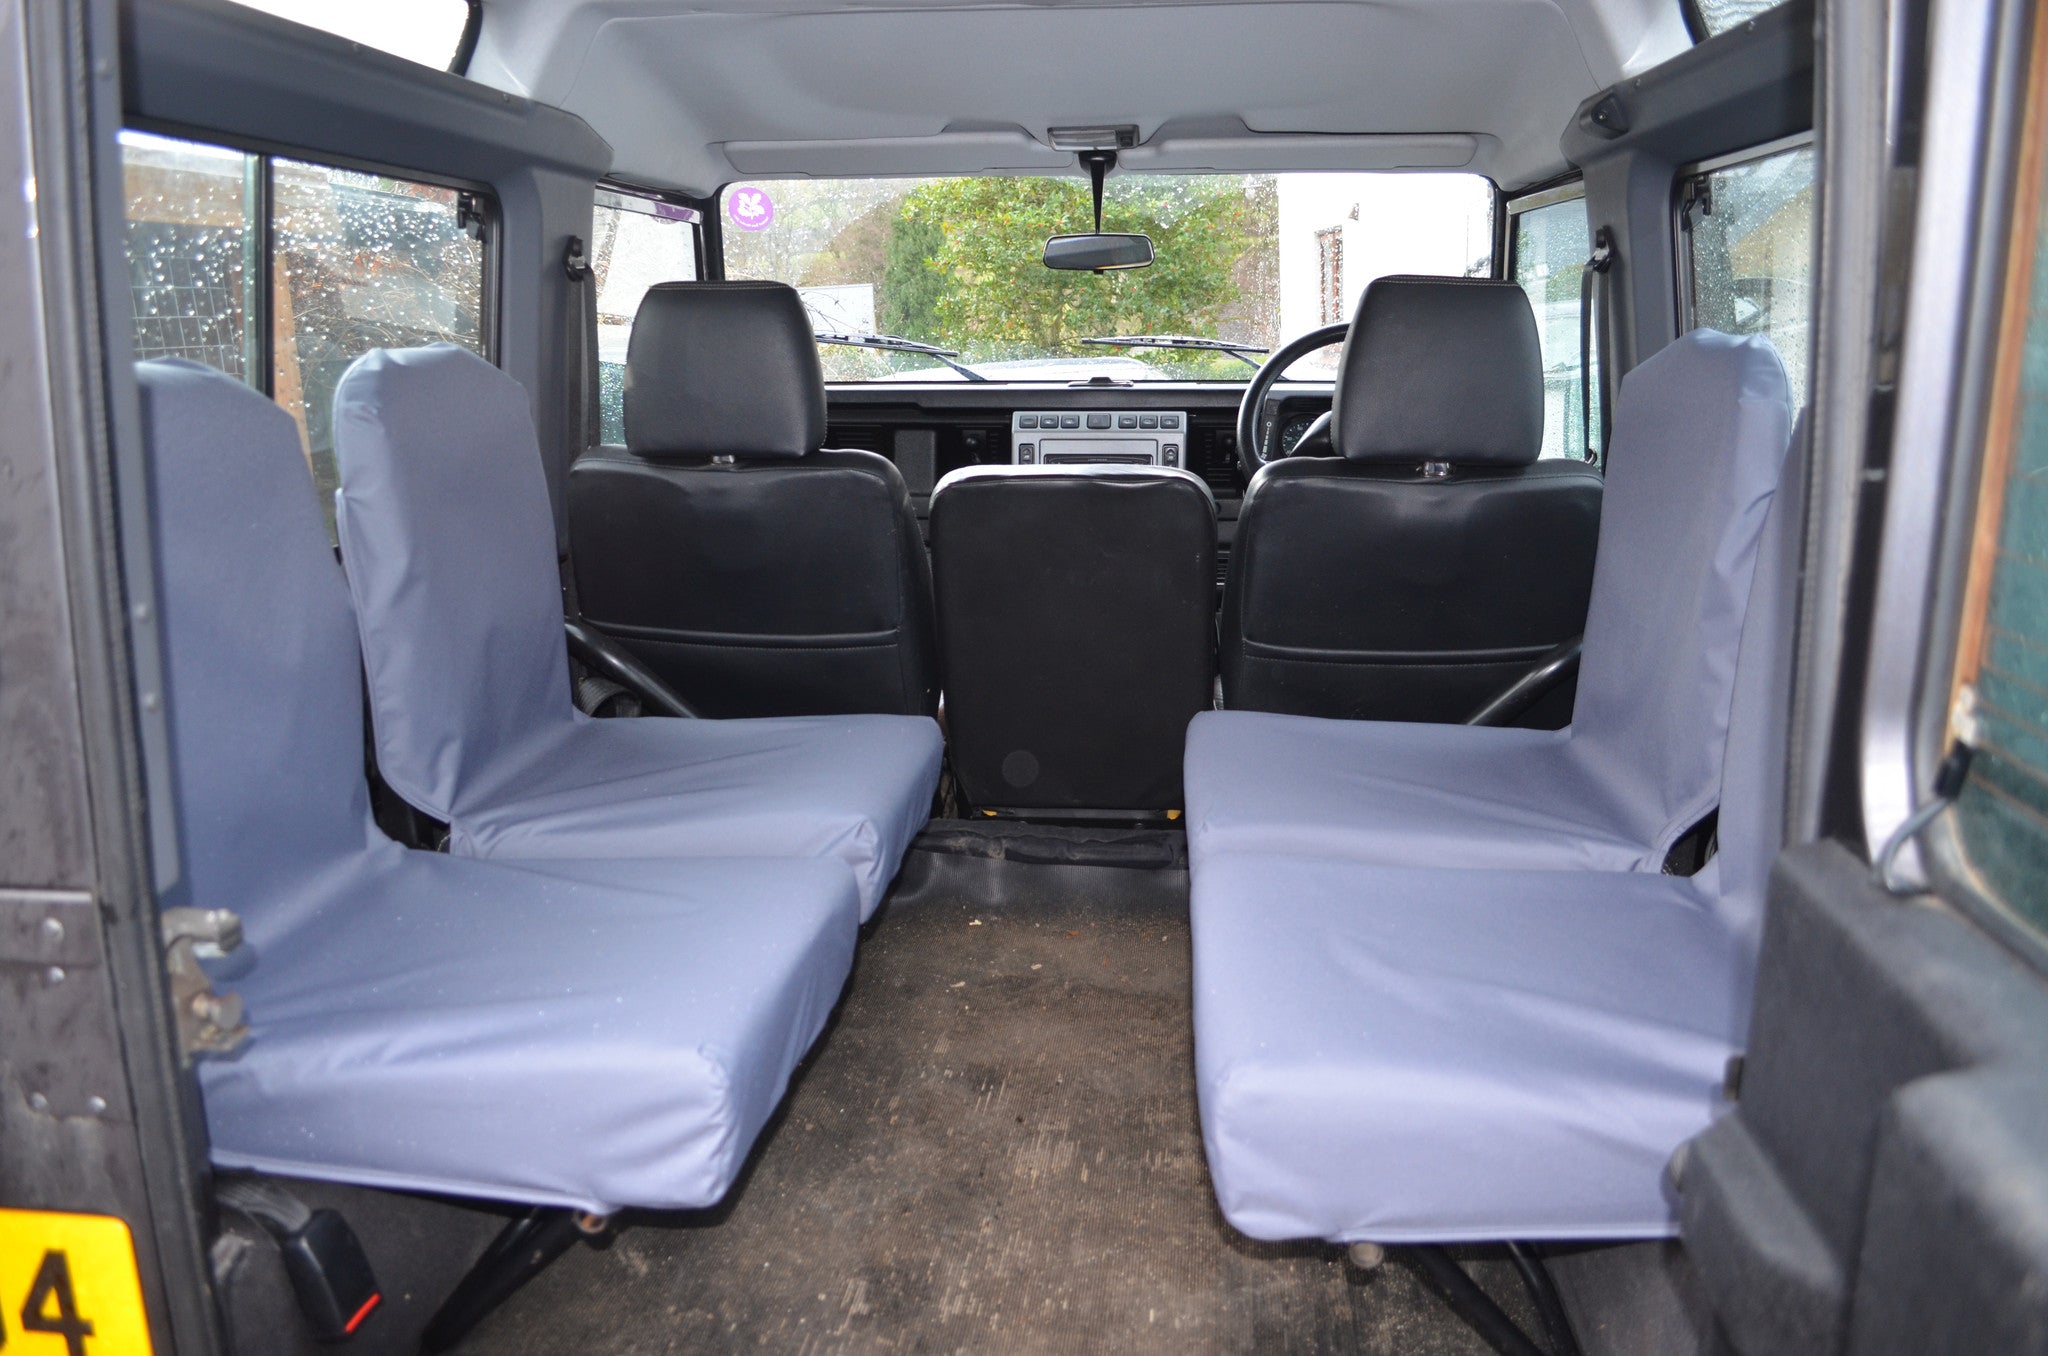 Land Rover Defender 1983 - 2007 Rear Seat Covers Set of 4 Dicky Seats / Grey Turtle Covers Ltd